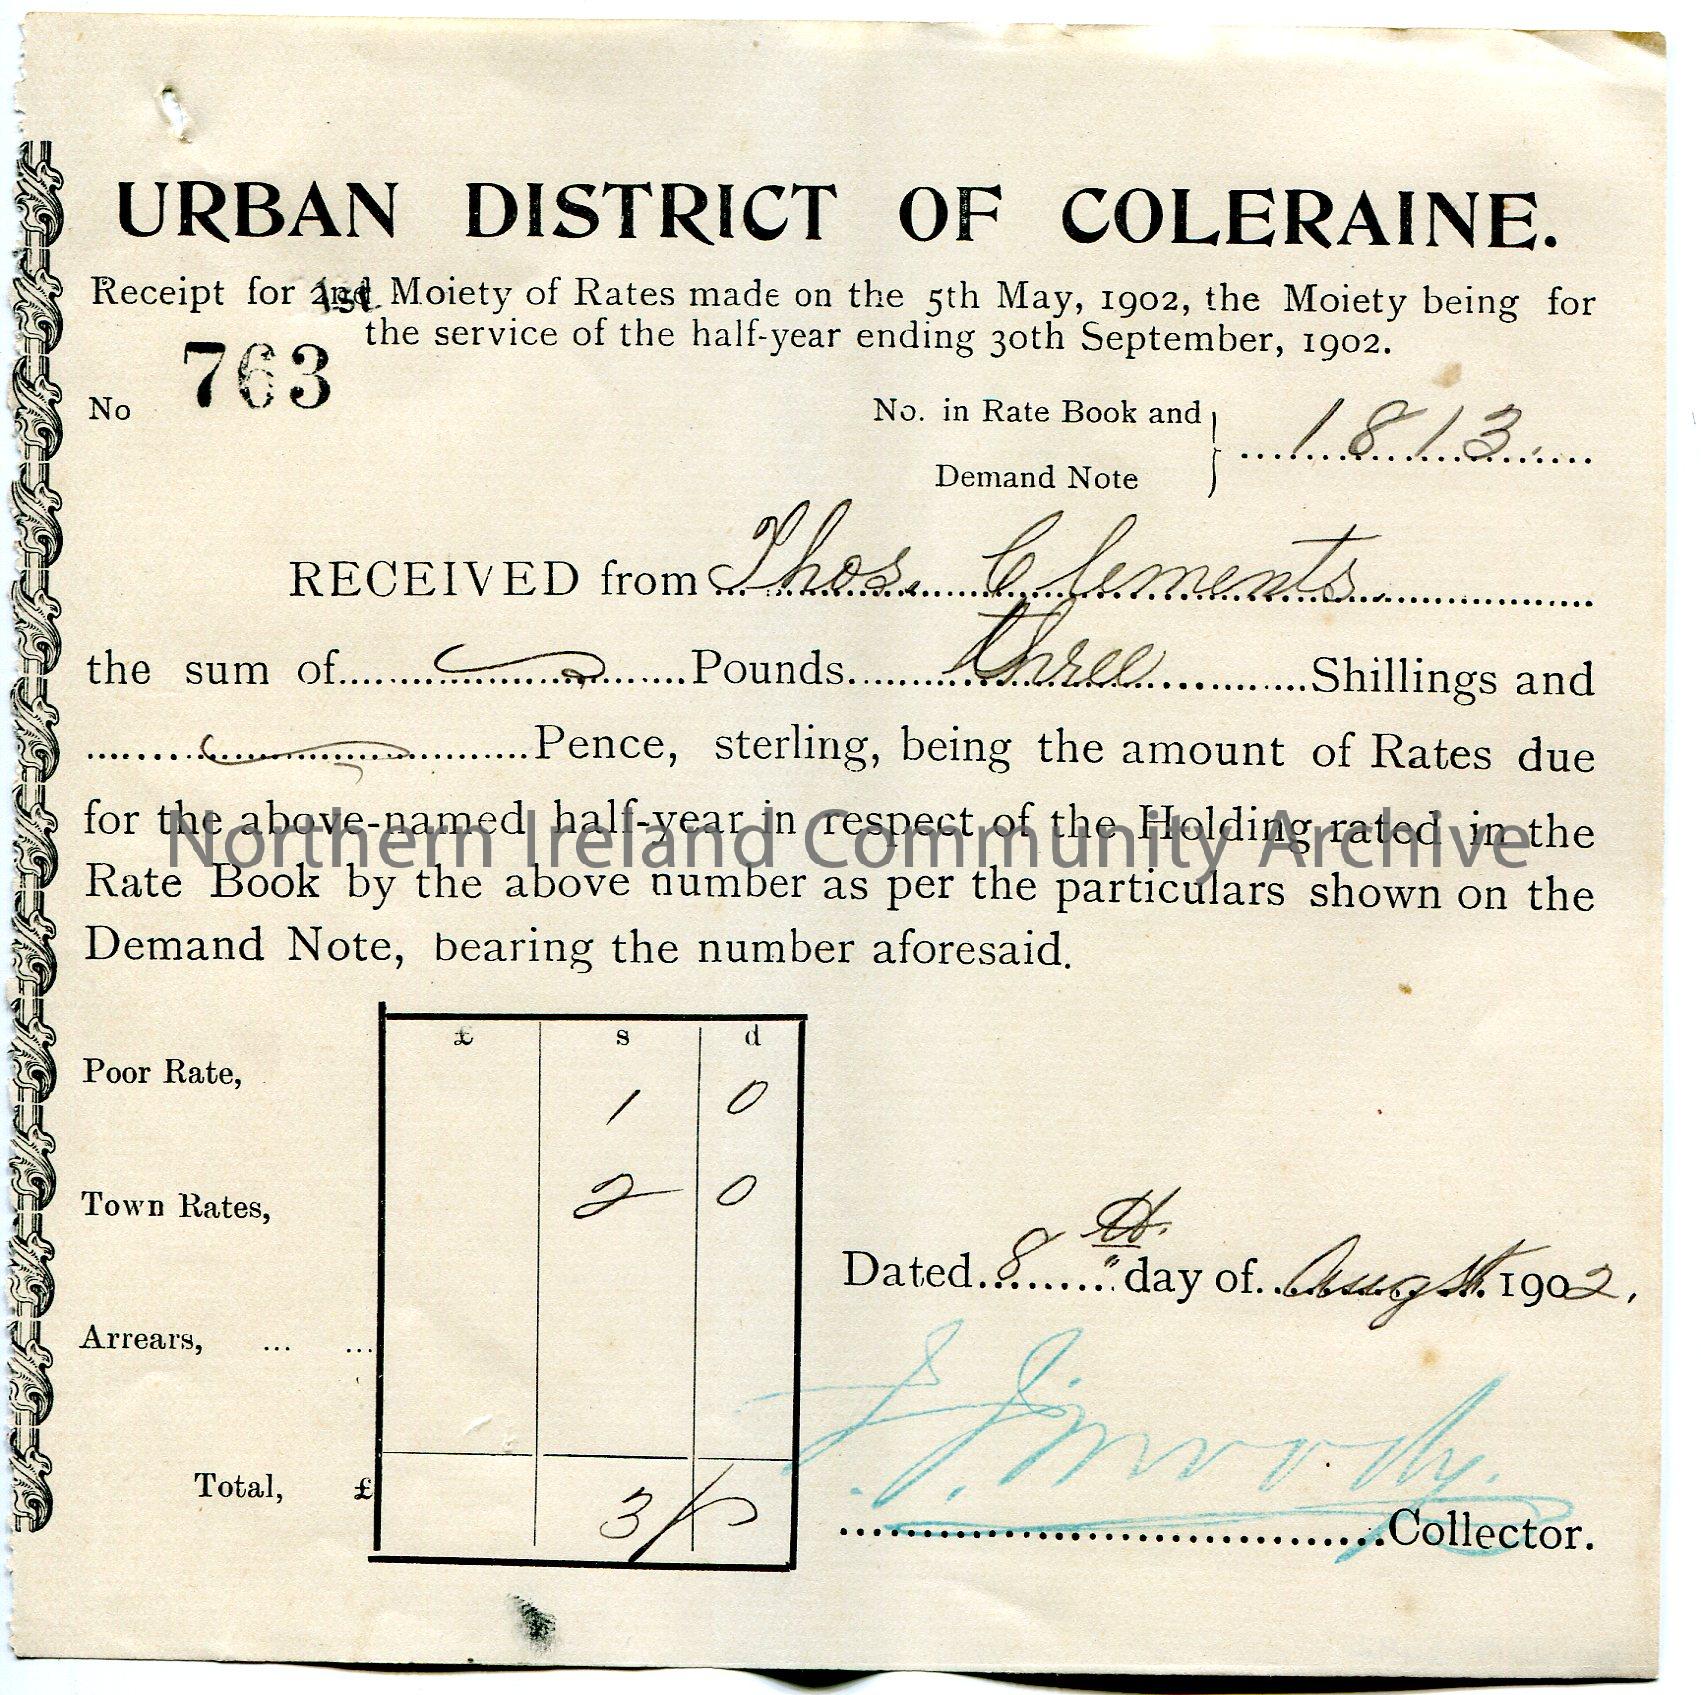 Printed and handwritten receipt for half year rates ending 30th September, 1902 for a property. Receipt no. 763. Issued by Urban District of Coleraine…